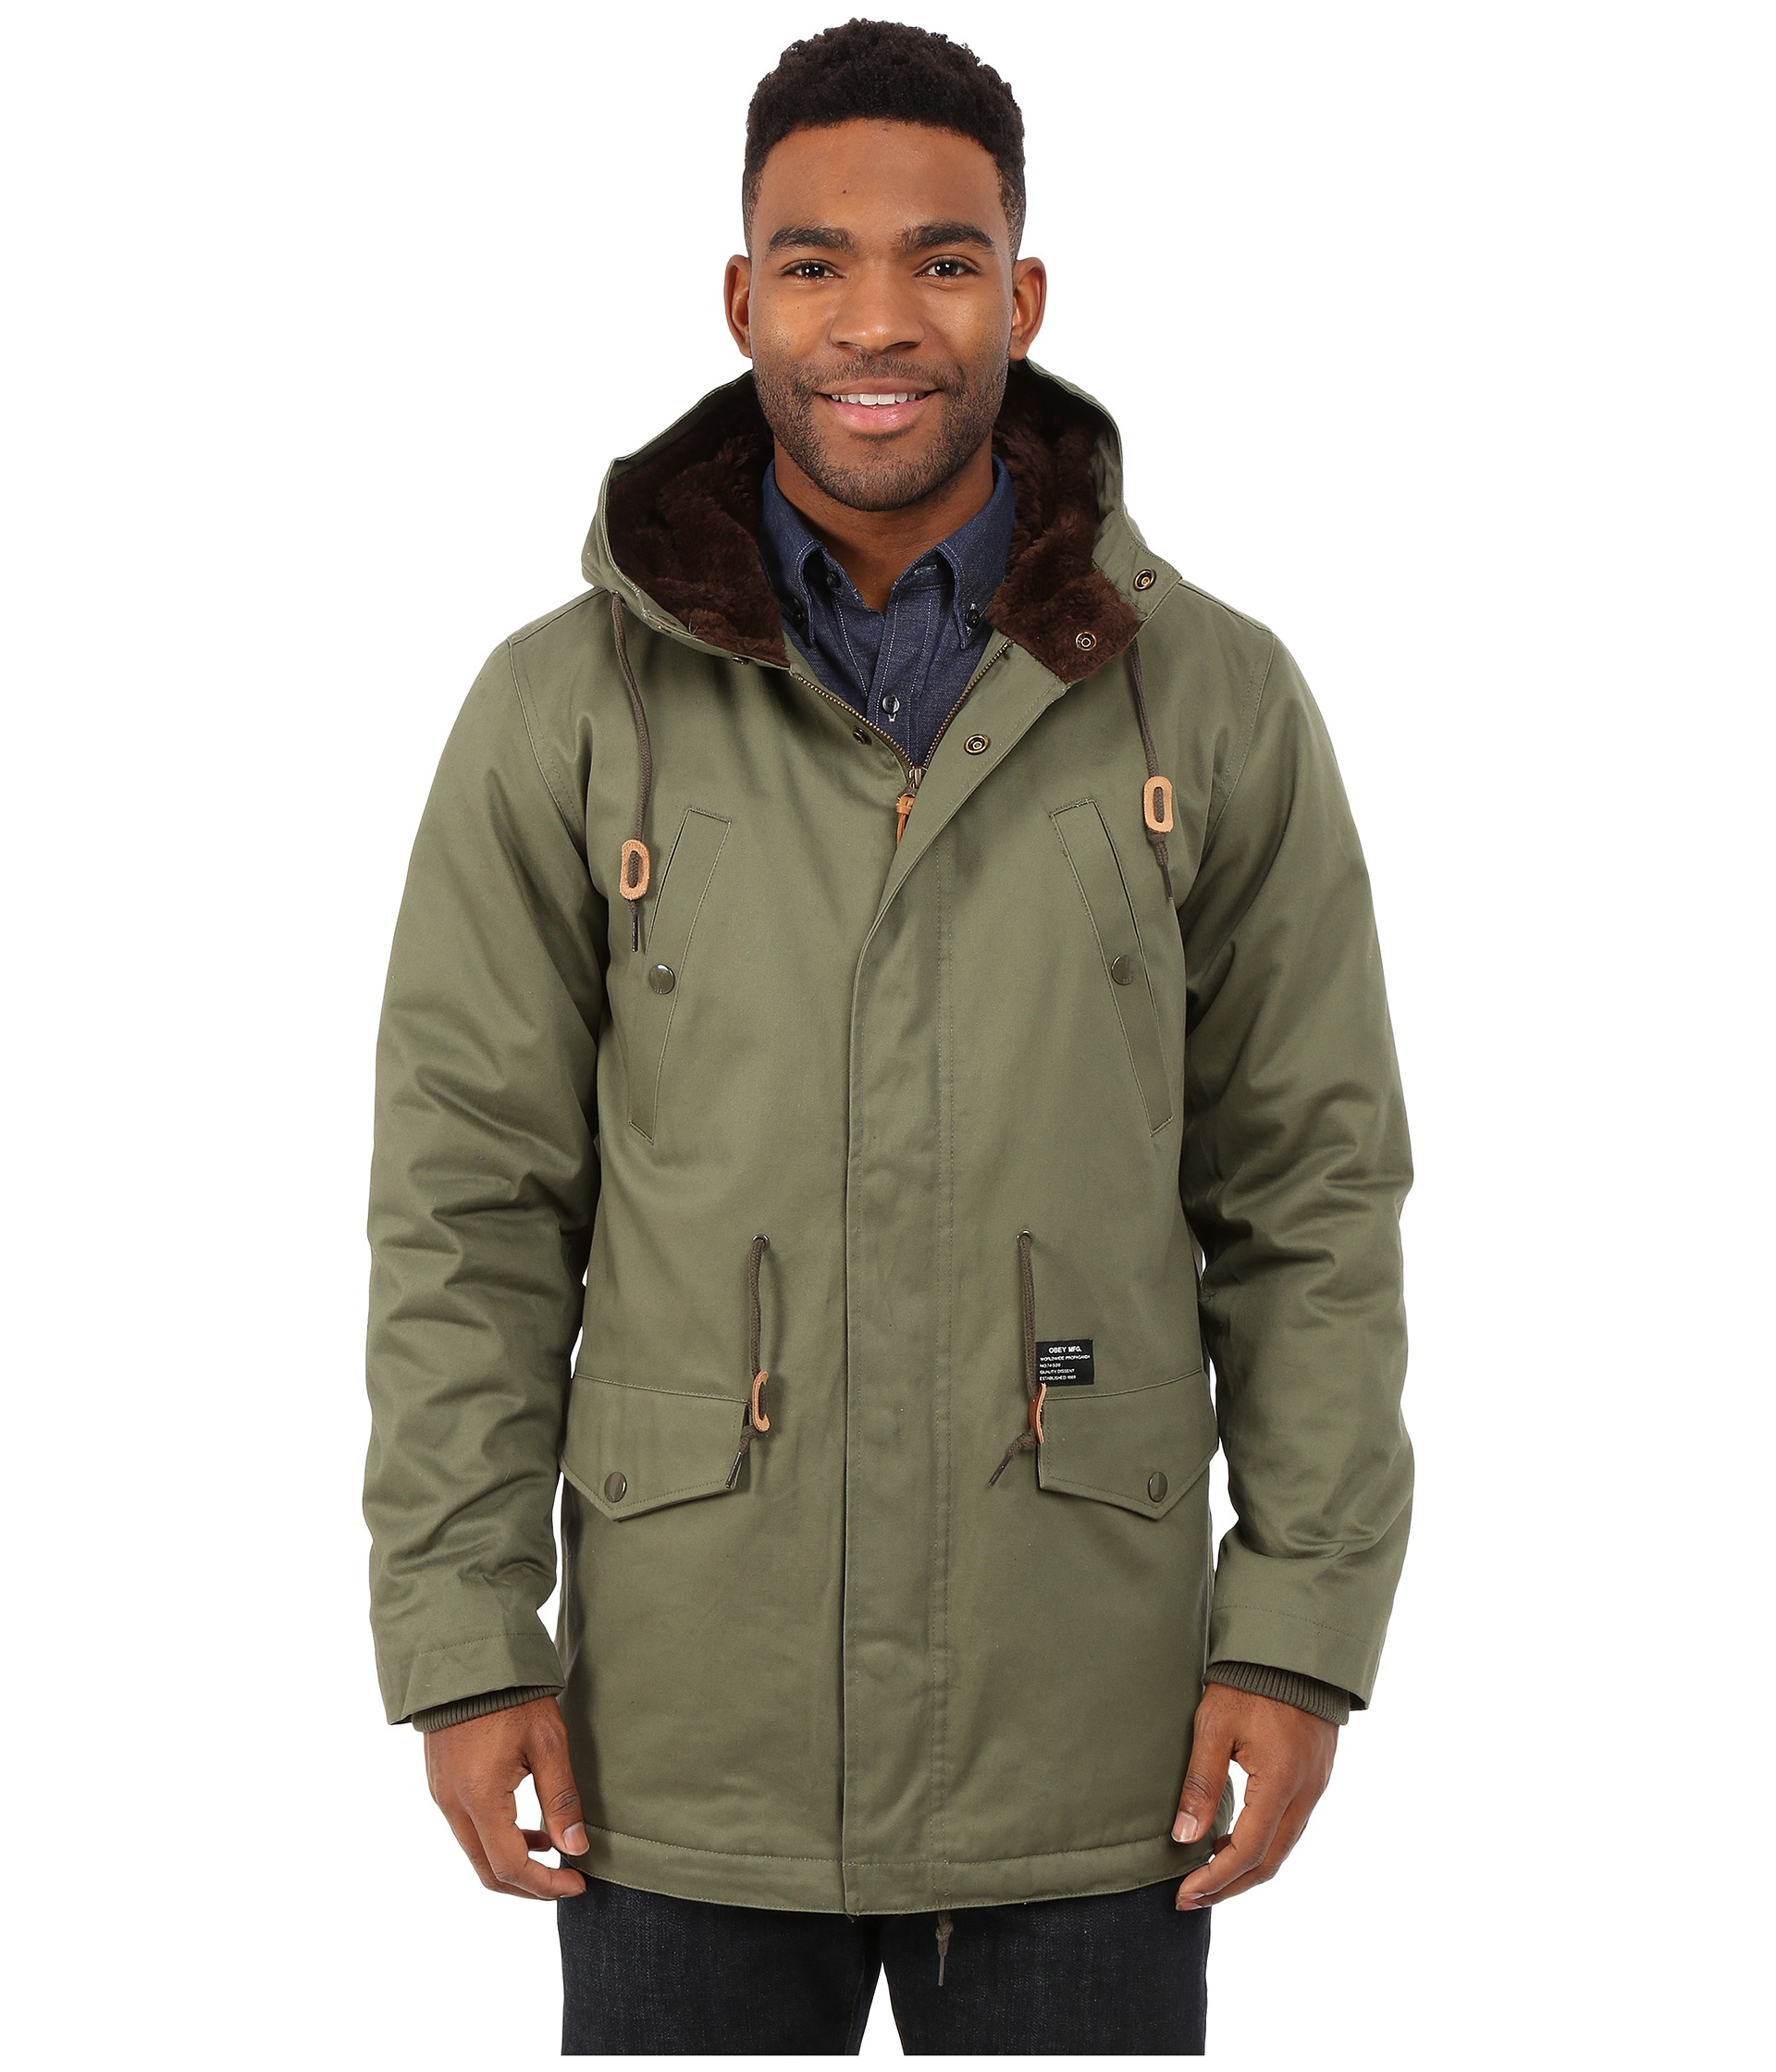 Obey Ransack Parka Jacket in Light Army (Green) for Men - Lyst